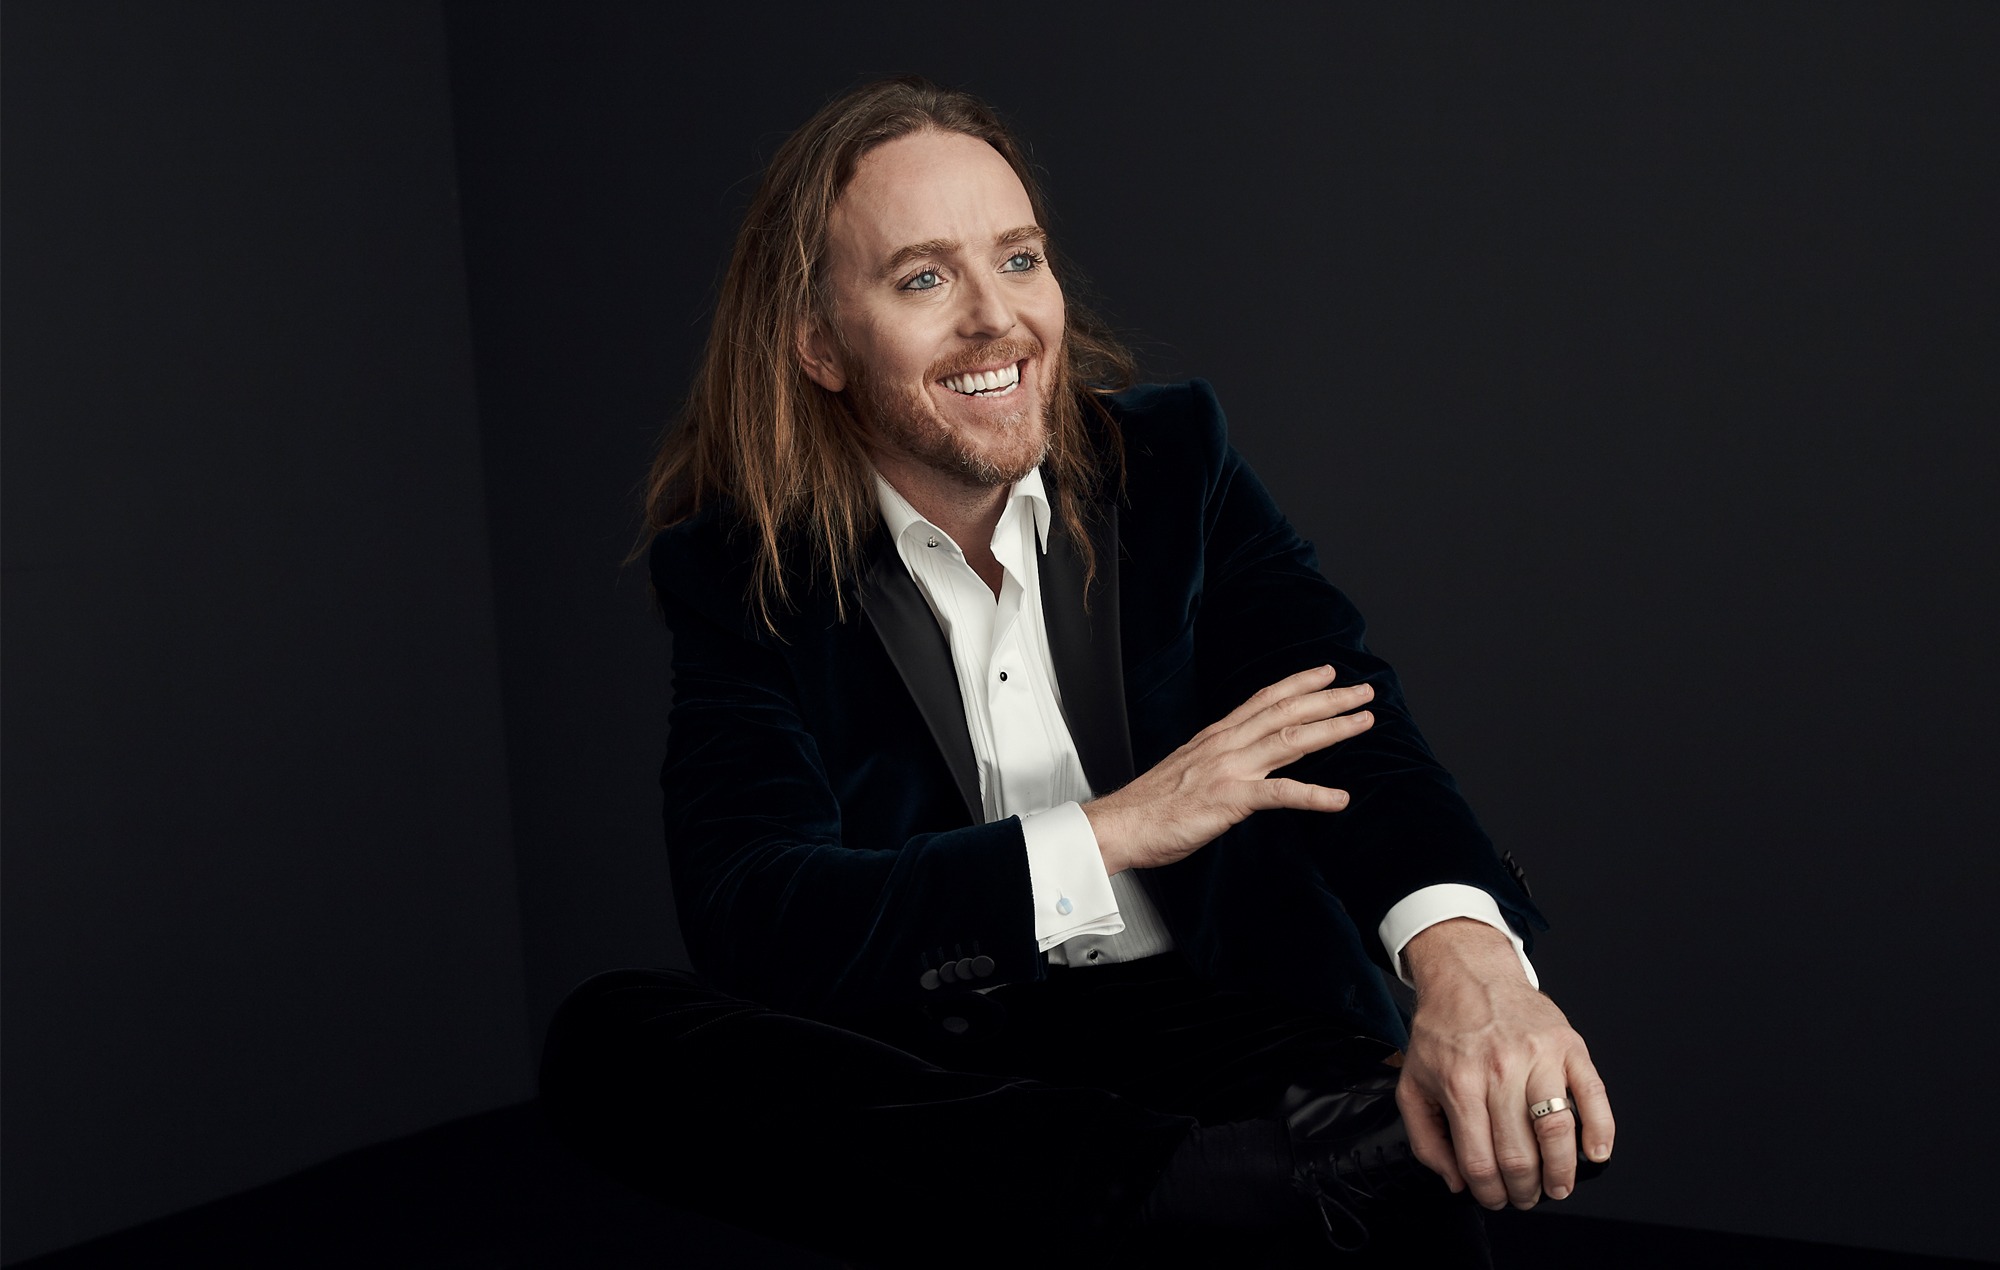 Tim Minchin shares single ‘I’ll Take Lonely Tonight’ from new album ‘Apart Together’